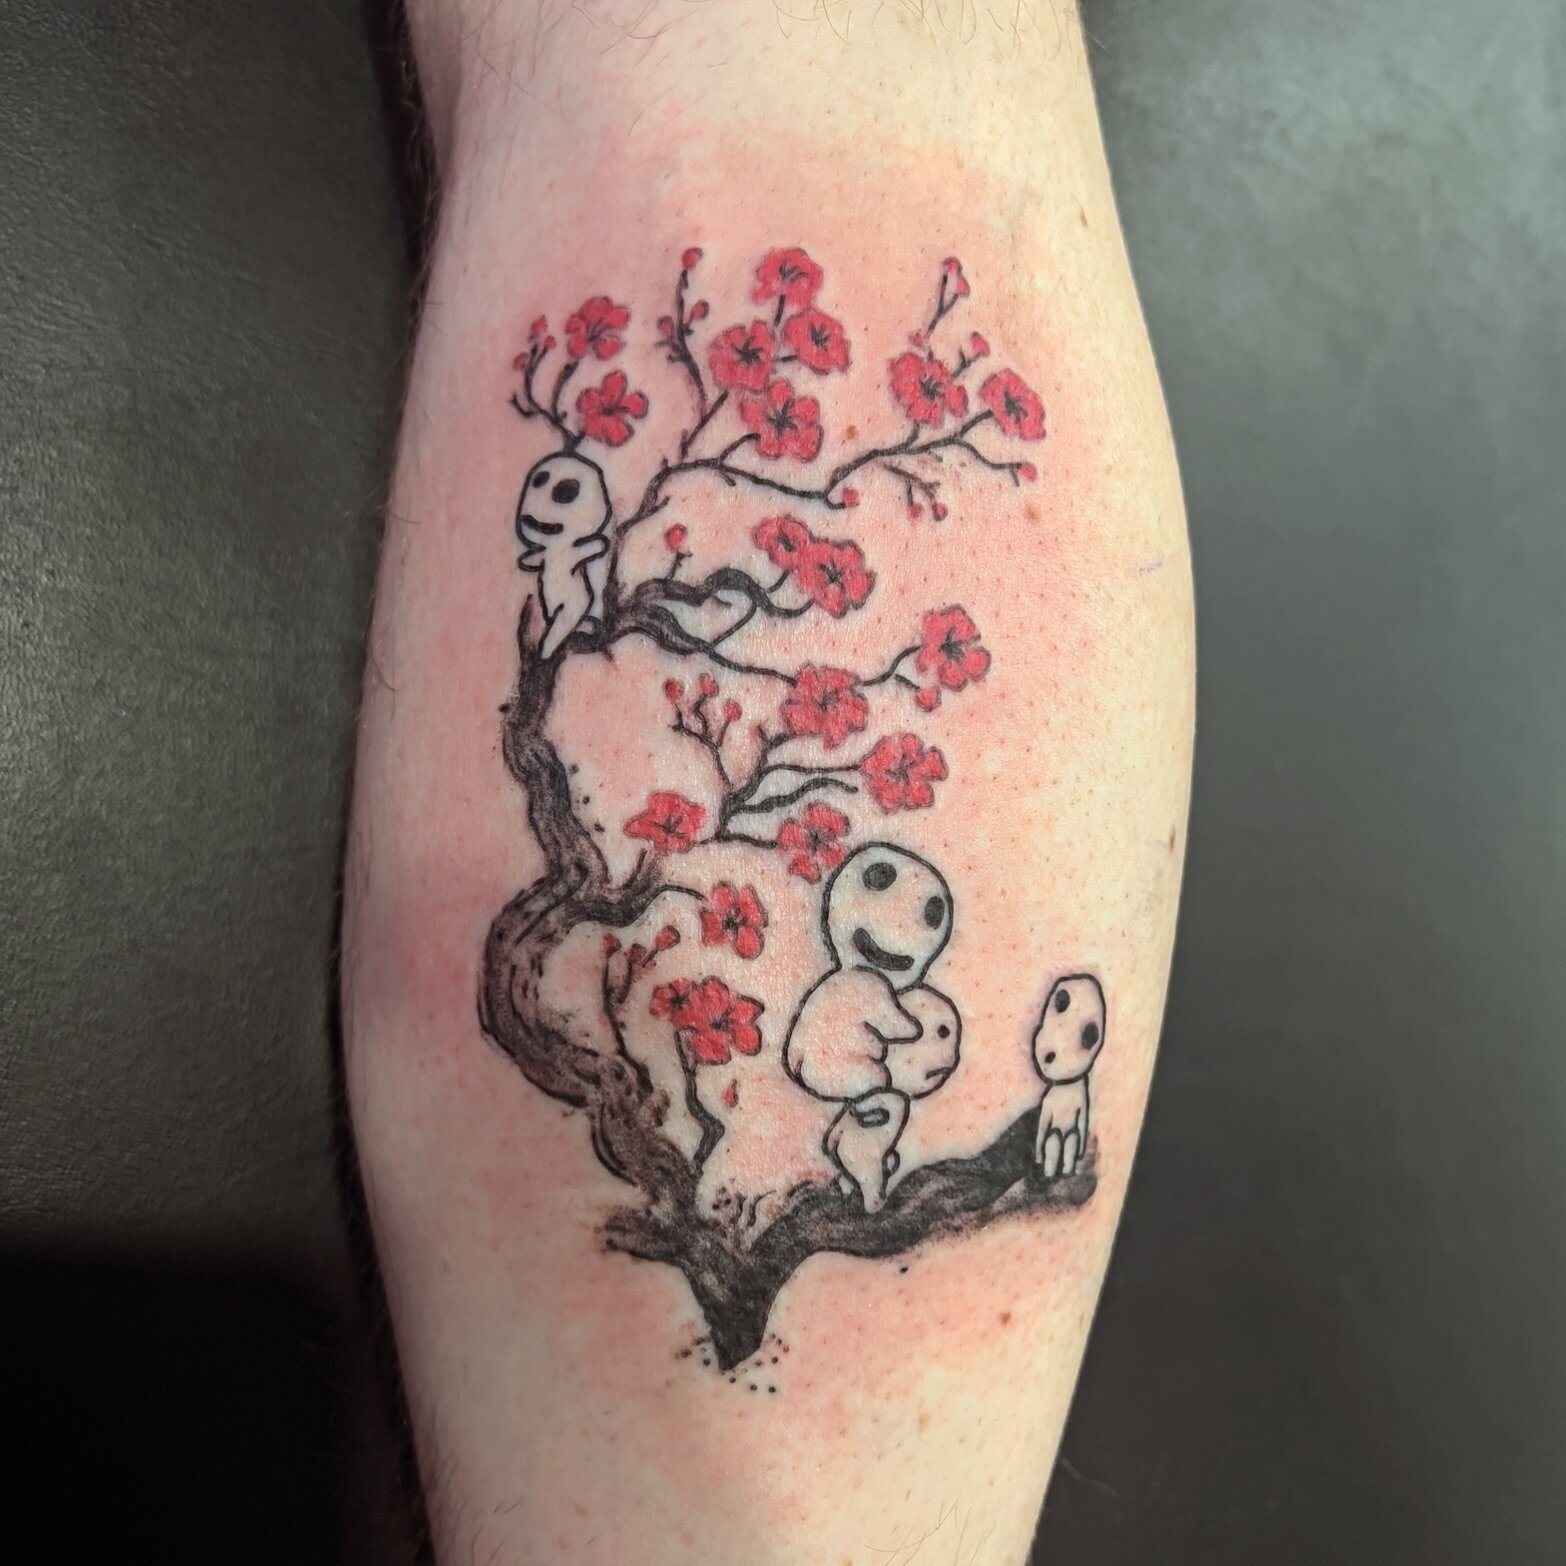 Fun walk in Tattoo I did this week. I&rsquo;ve got a lil time today too!!!

⬆️ This is one of my top fave Ghibli films. 

#reneeniestat2 #mystichareartz #butterzmcloventattoos #robot #robotarmy #walkintattoo #walkinswelcome #princessmononoke #forests